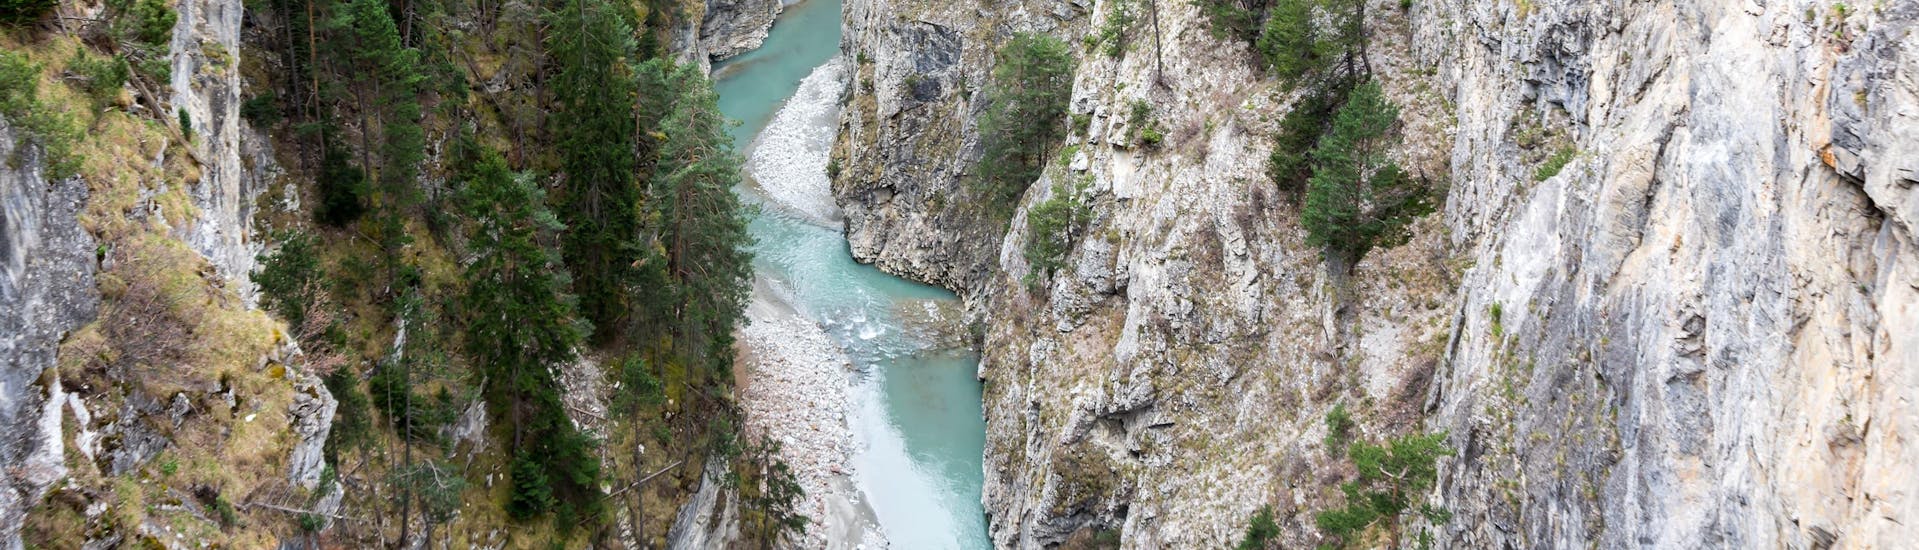 View of a gorge in the Annecy area where you can do canyonin in the Angon Canyon.